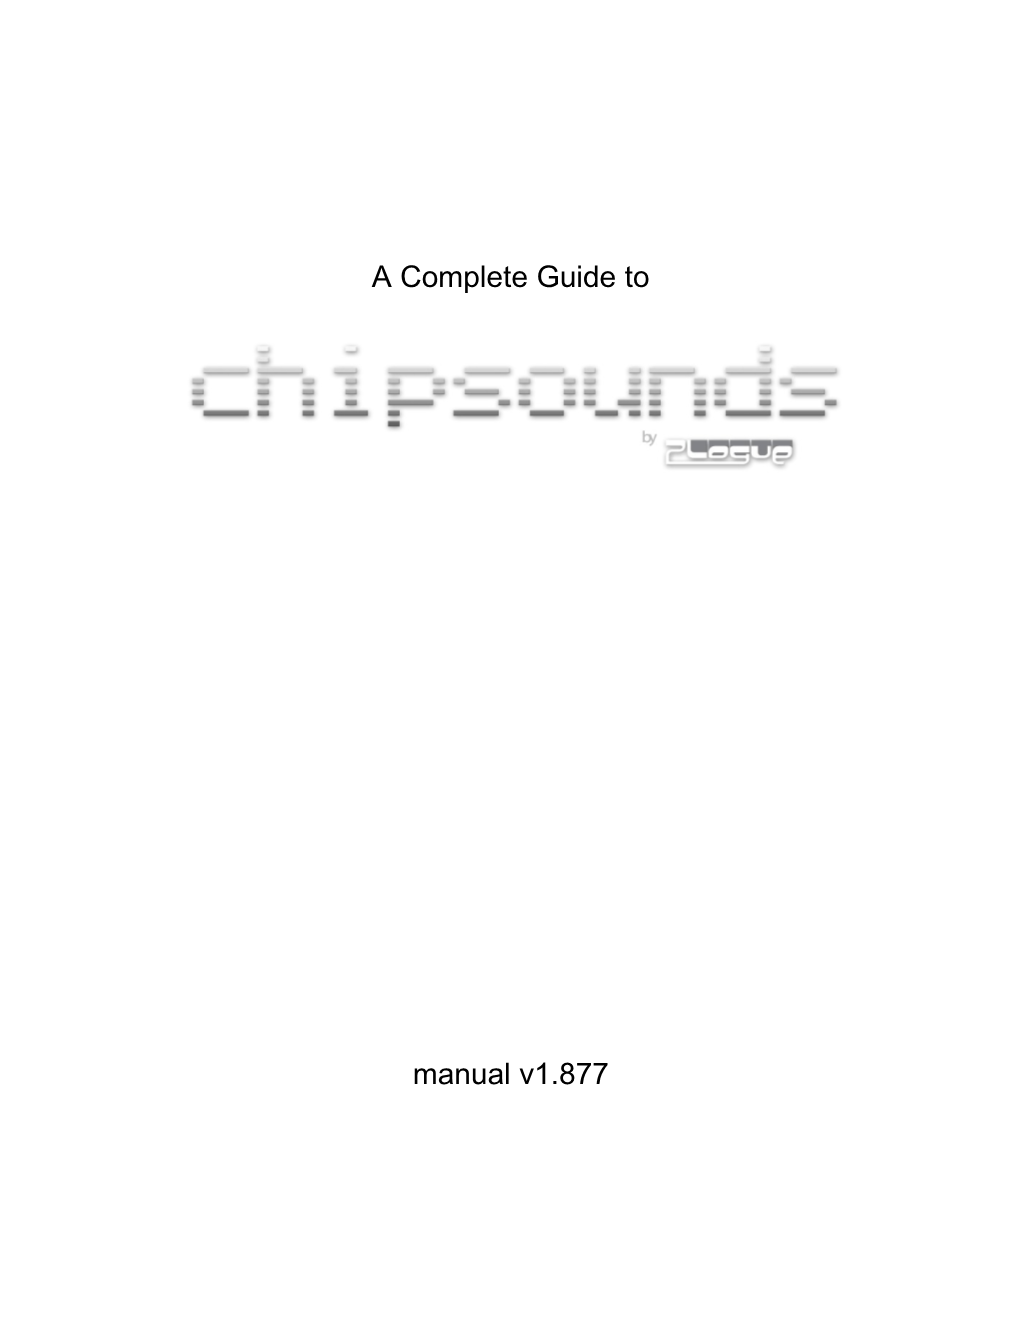 Chipsounds Manual